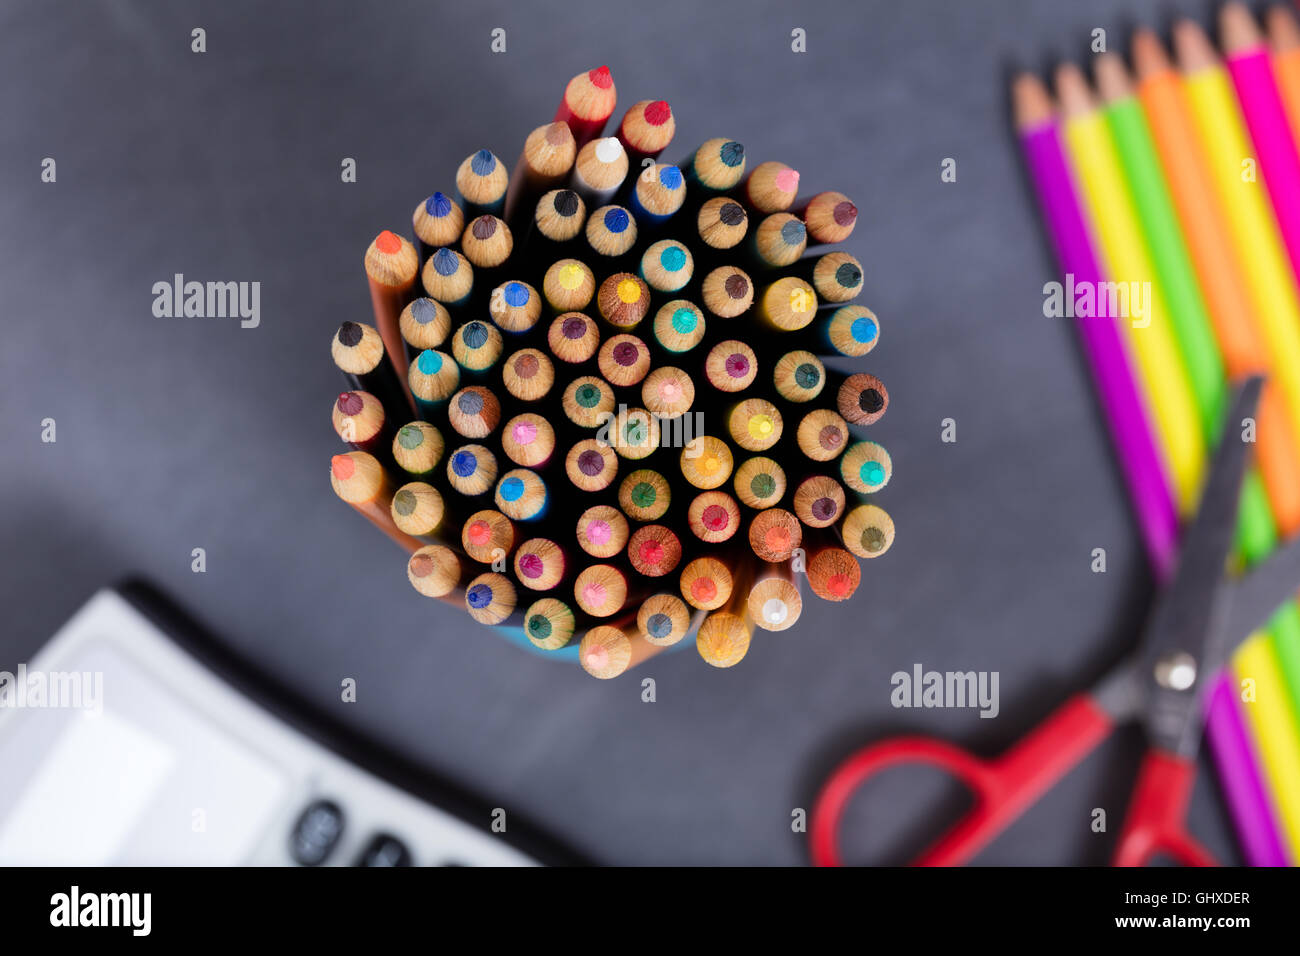 Selective focus on close up top view of colorful pencil tips with school supplies and erased chalkboard in background. Stock Photo